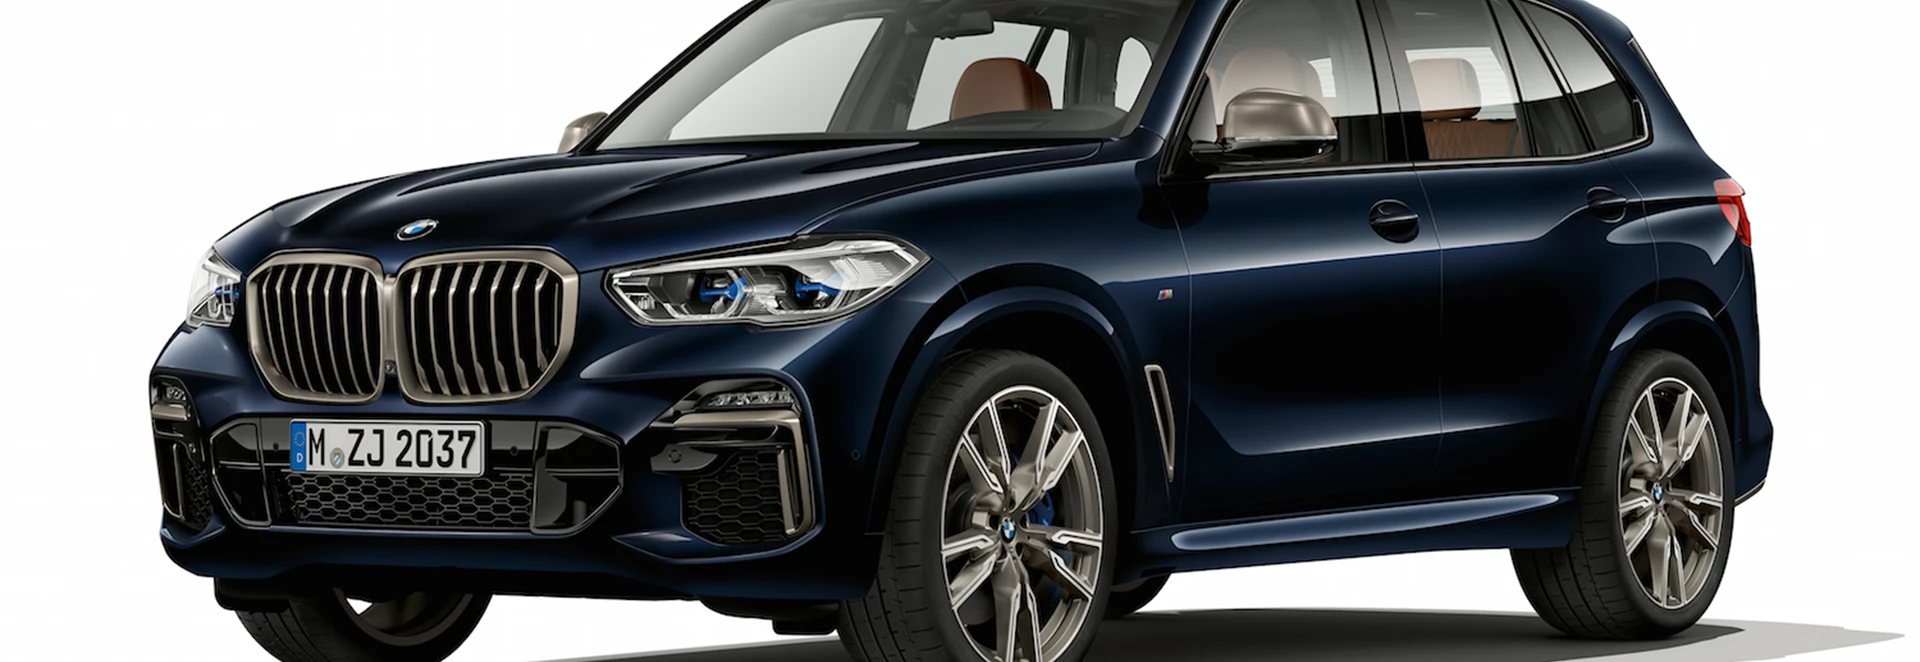 Monstrous BMW X5 and X7 revealed with 523bhp